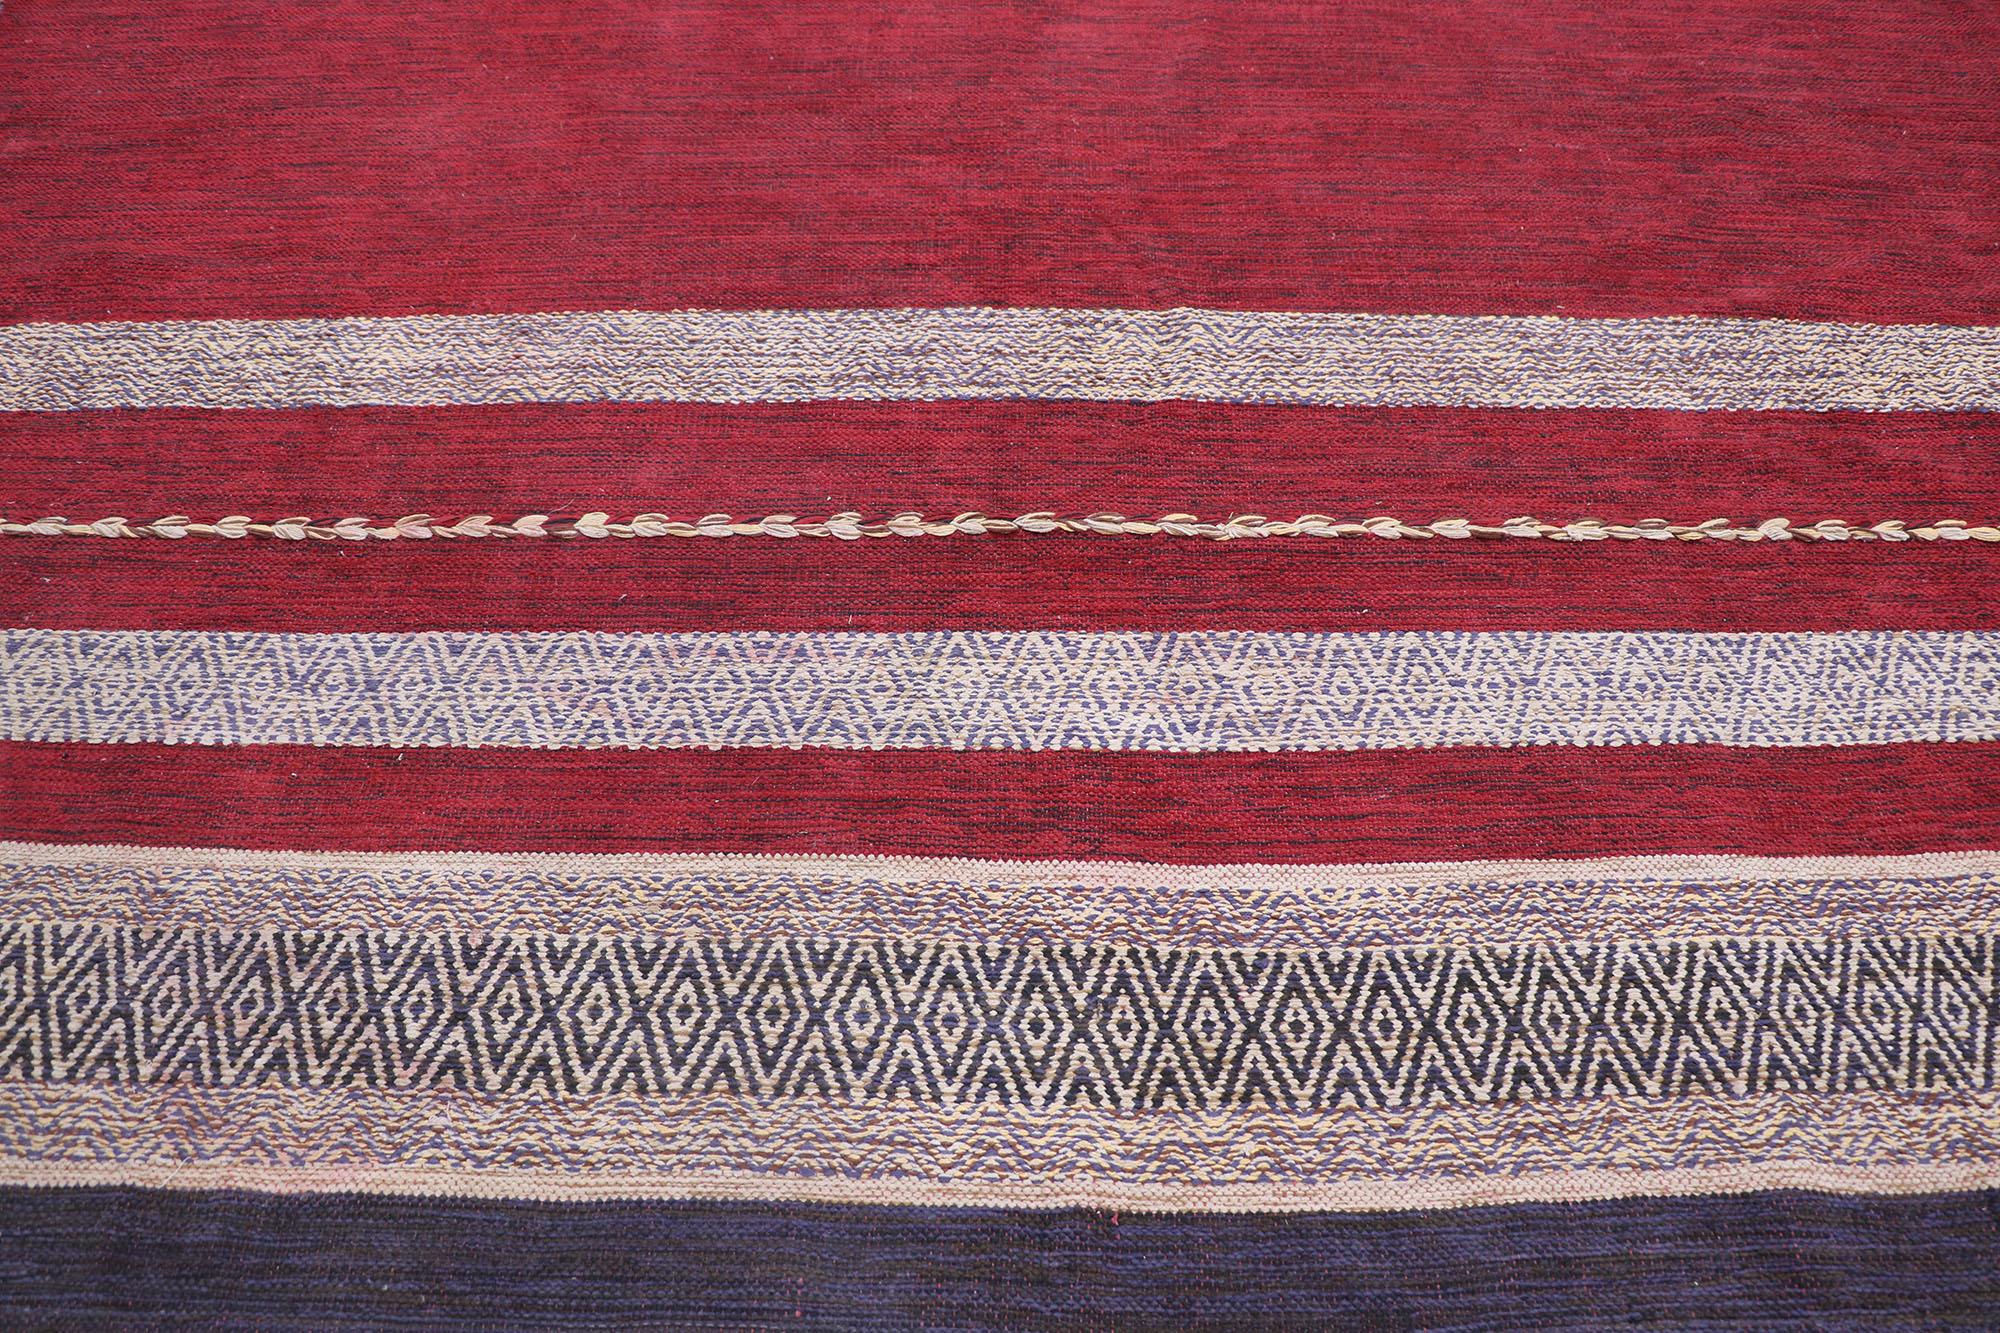 Vintage Berber Moroccan Kilim Rug with Nautical Style In Good Condition For Sale In Dallas, TX